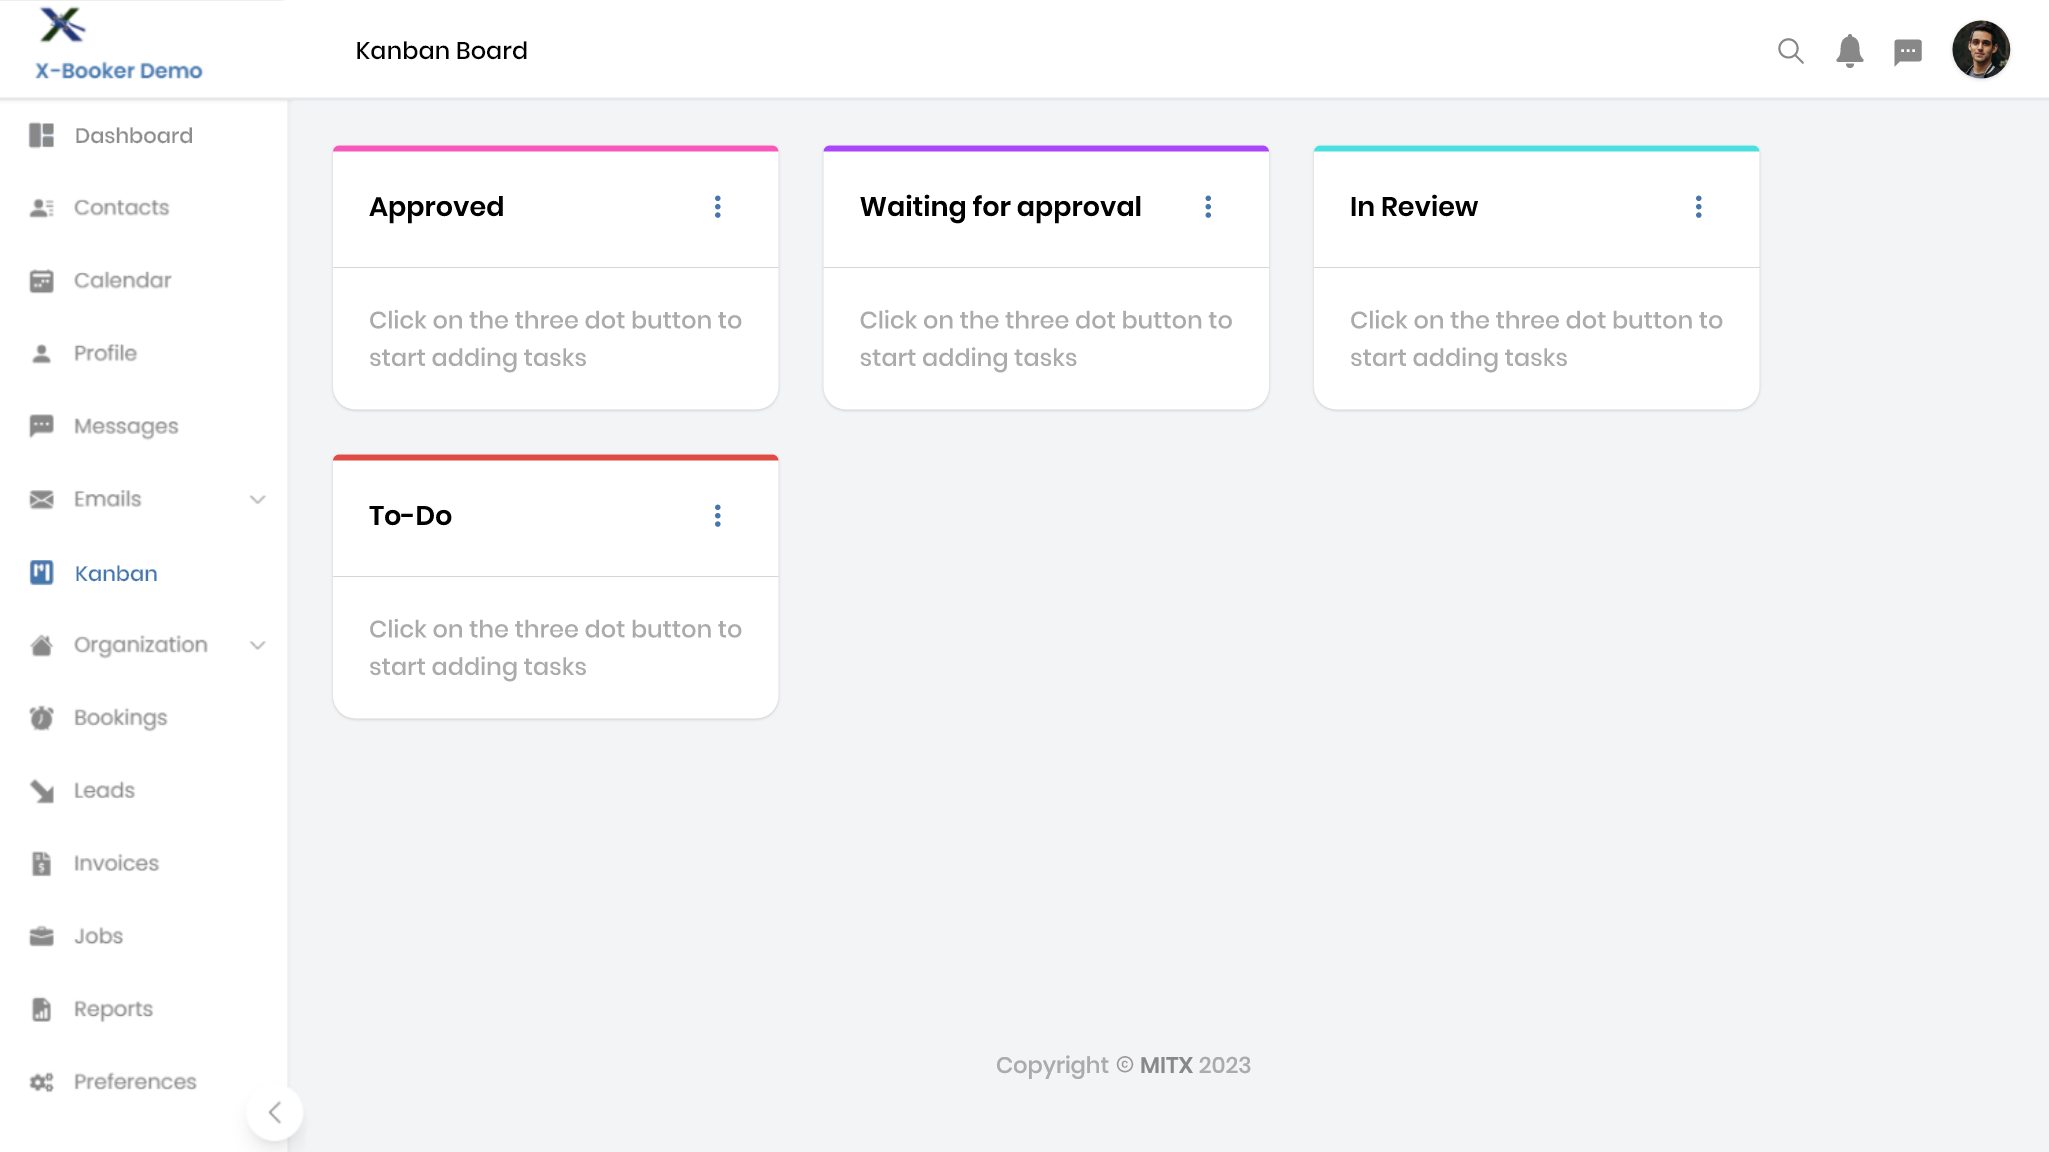 Kanban Board through which you can assign tasks or create some tasks in your organization with time tracking start date and due date and track the employee's activity by dedicating particular tasks.